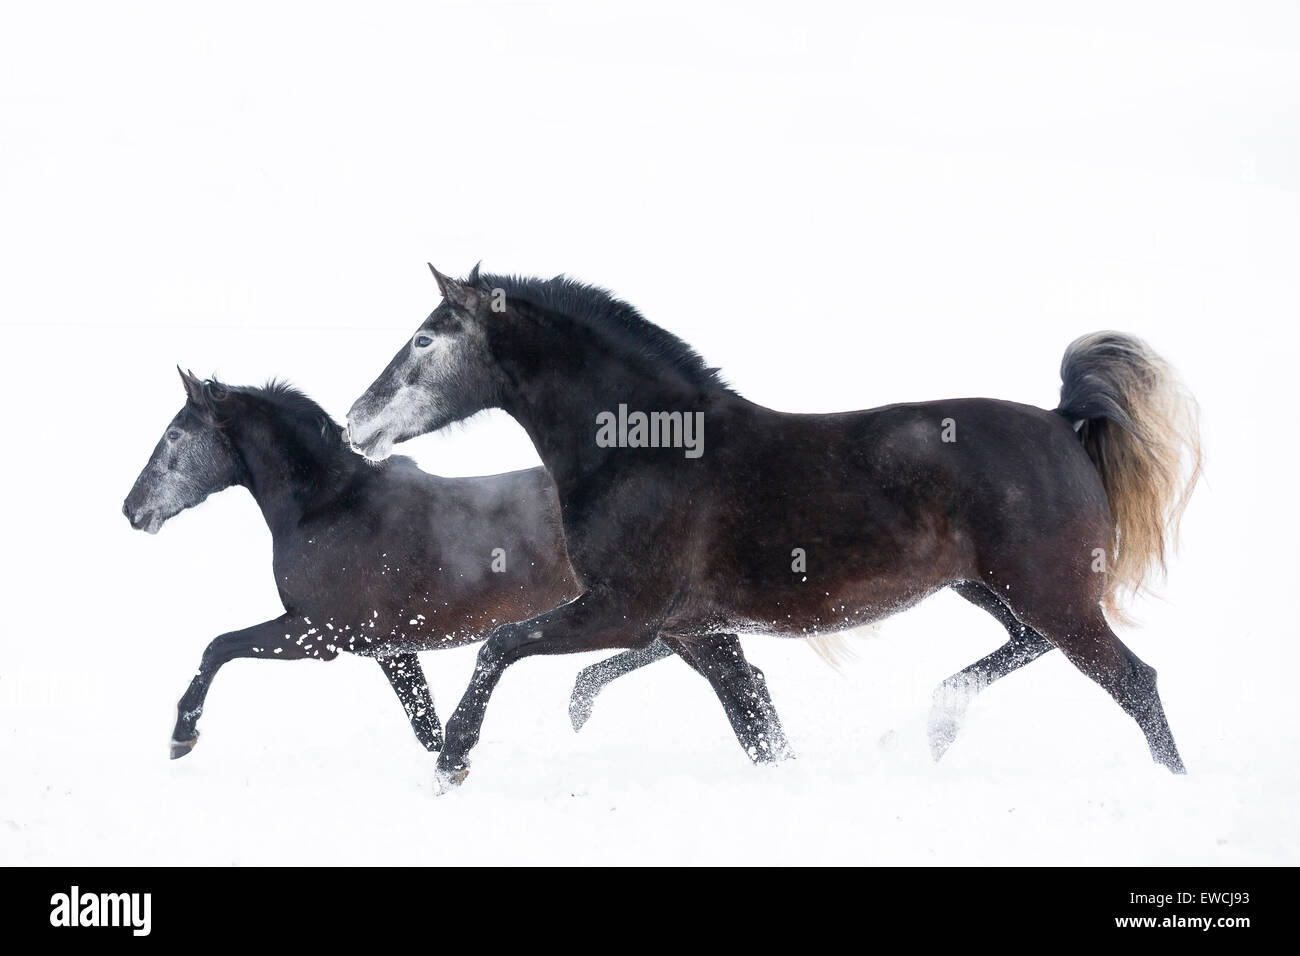 Pure Spanish Horse, Andalusian. Two mares trotting on a snowy pasture. Germany Stock Photo